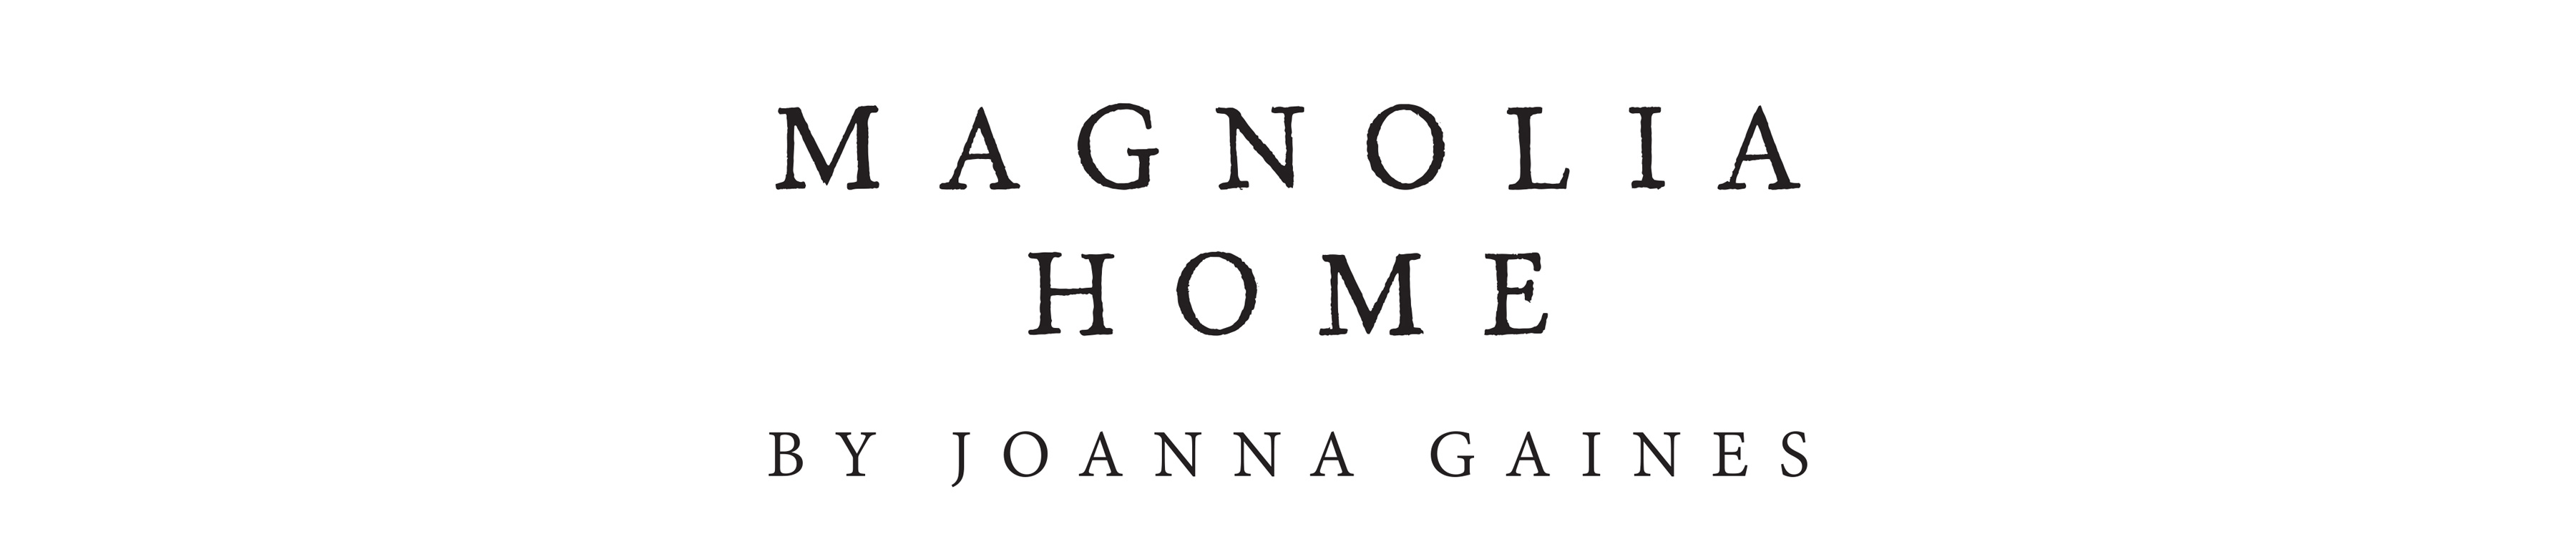 Magnolia Home by Joanna Gaines